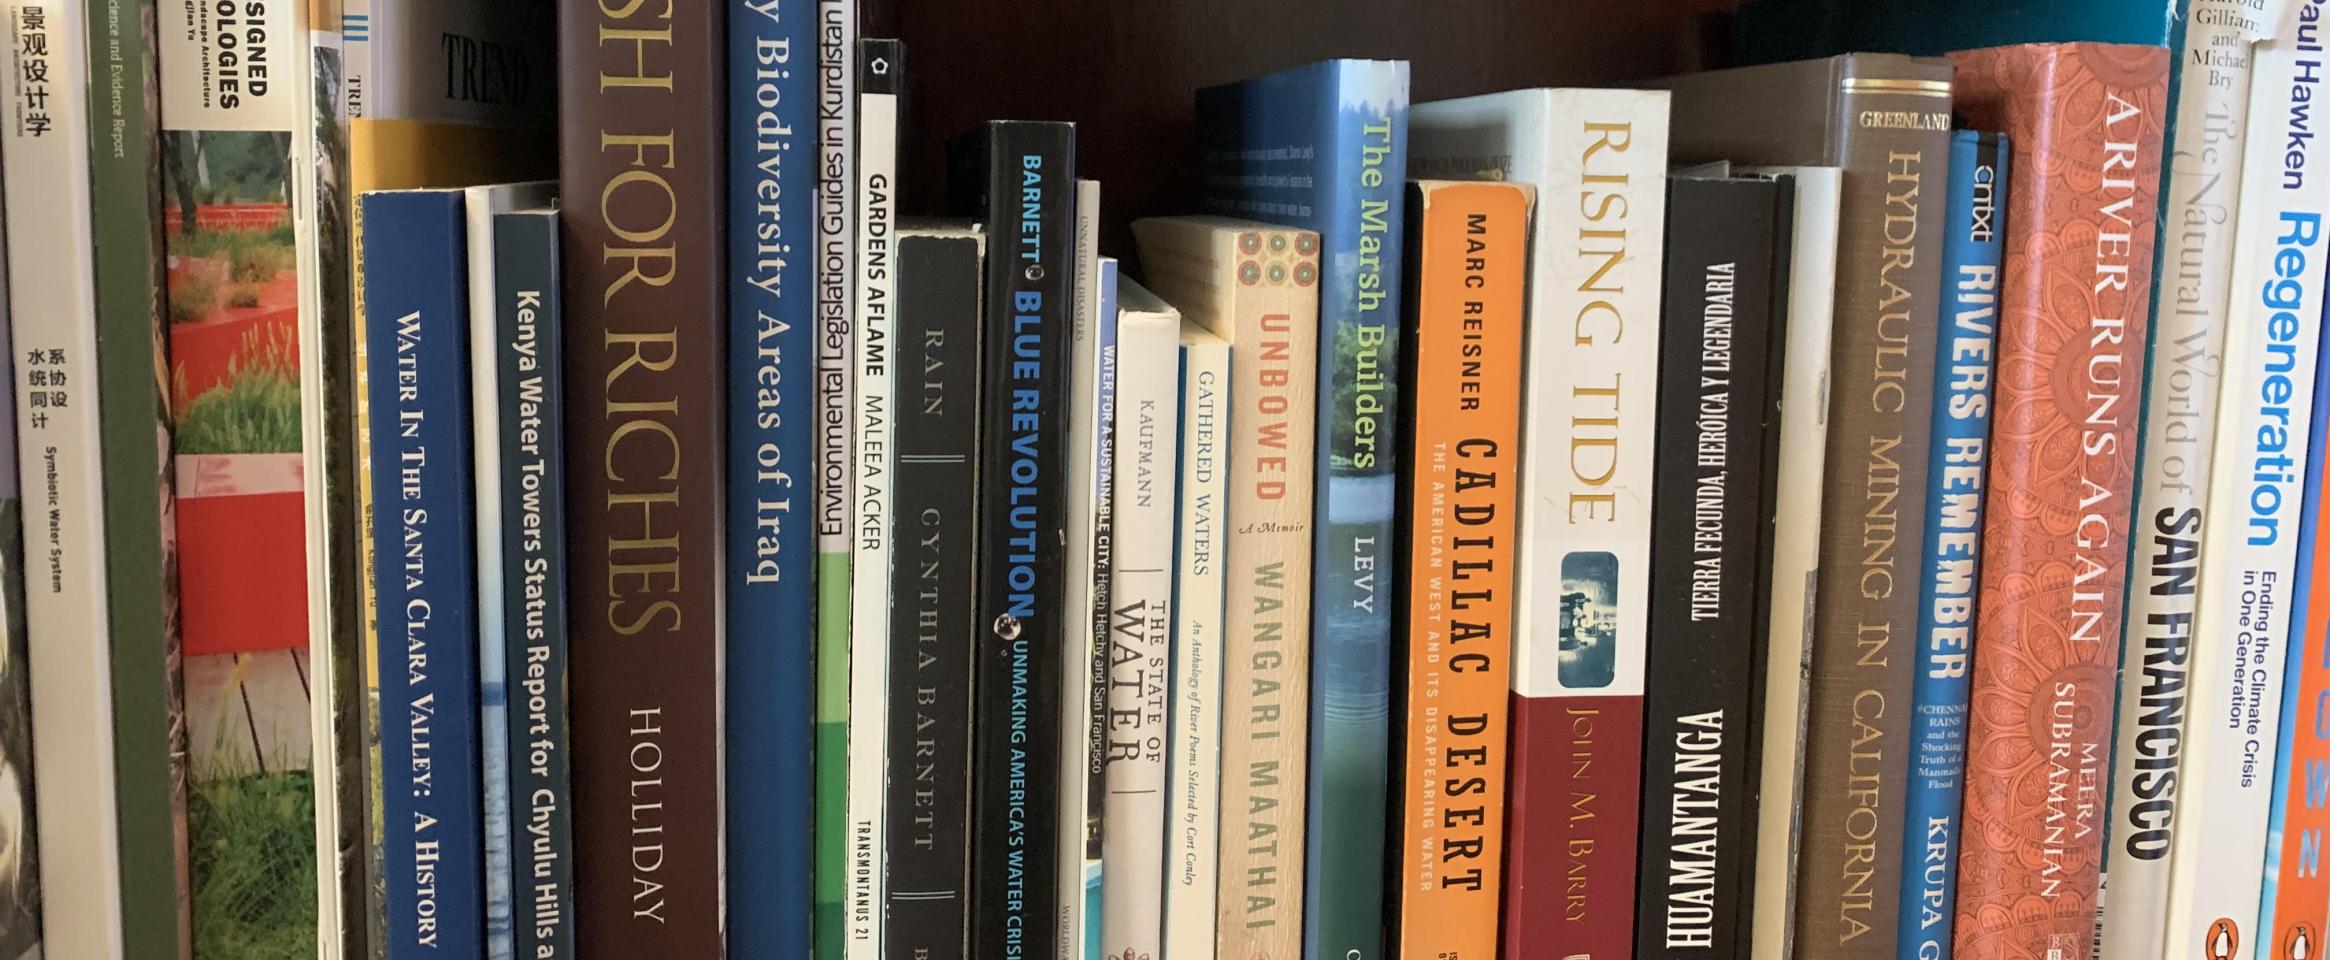 Rectangular photo of Erica Gies’ office bookshelf showing works on water and water-related topics including ecology, environmental legislation, rain, marshes, and rivers. Photo credit: Erica Gies.